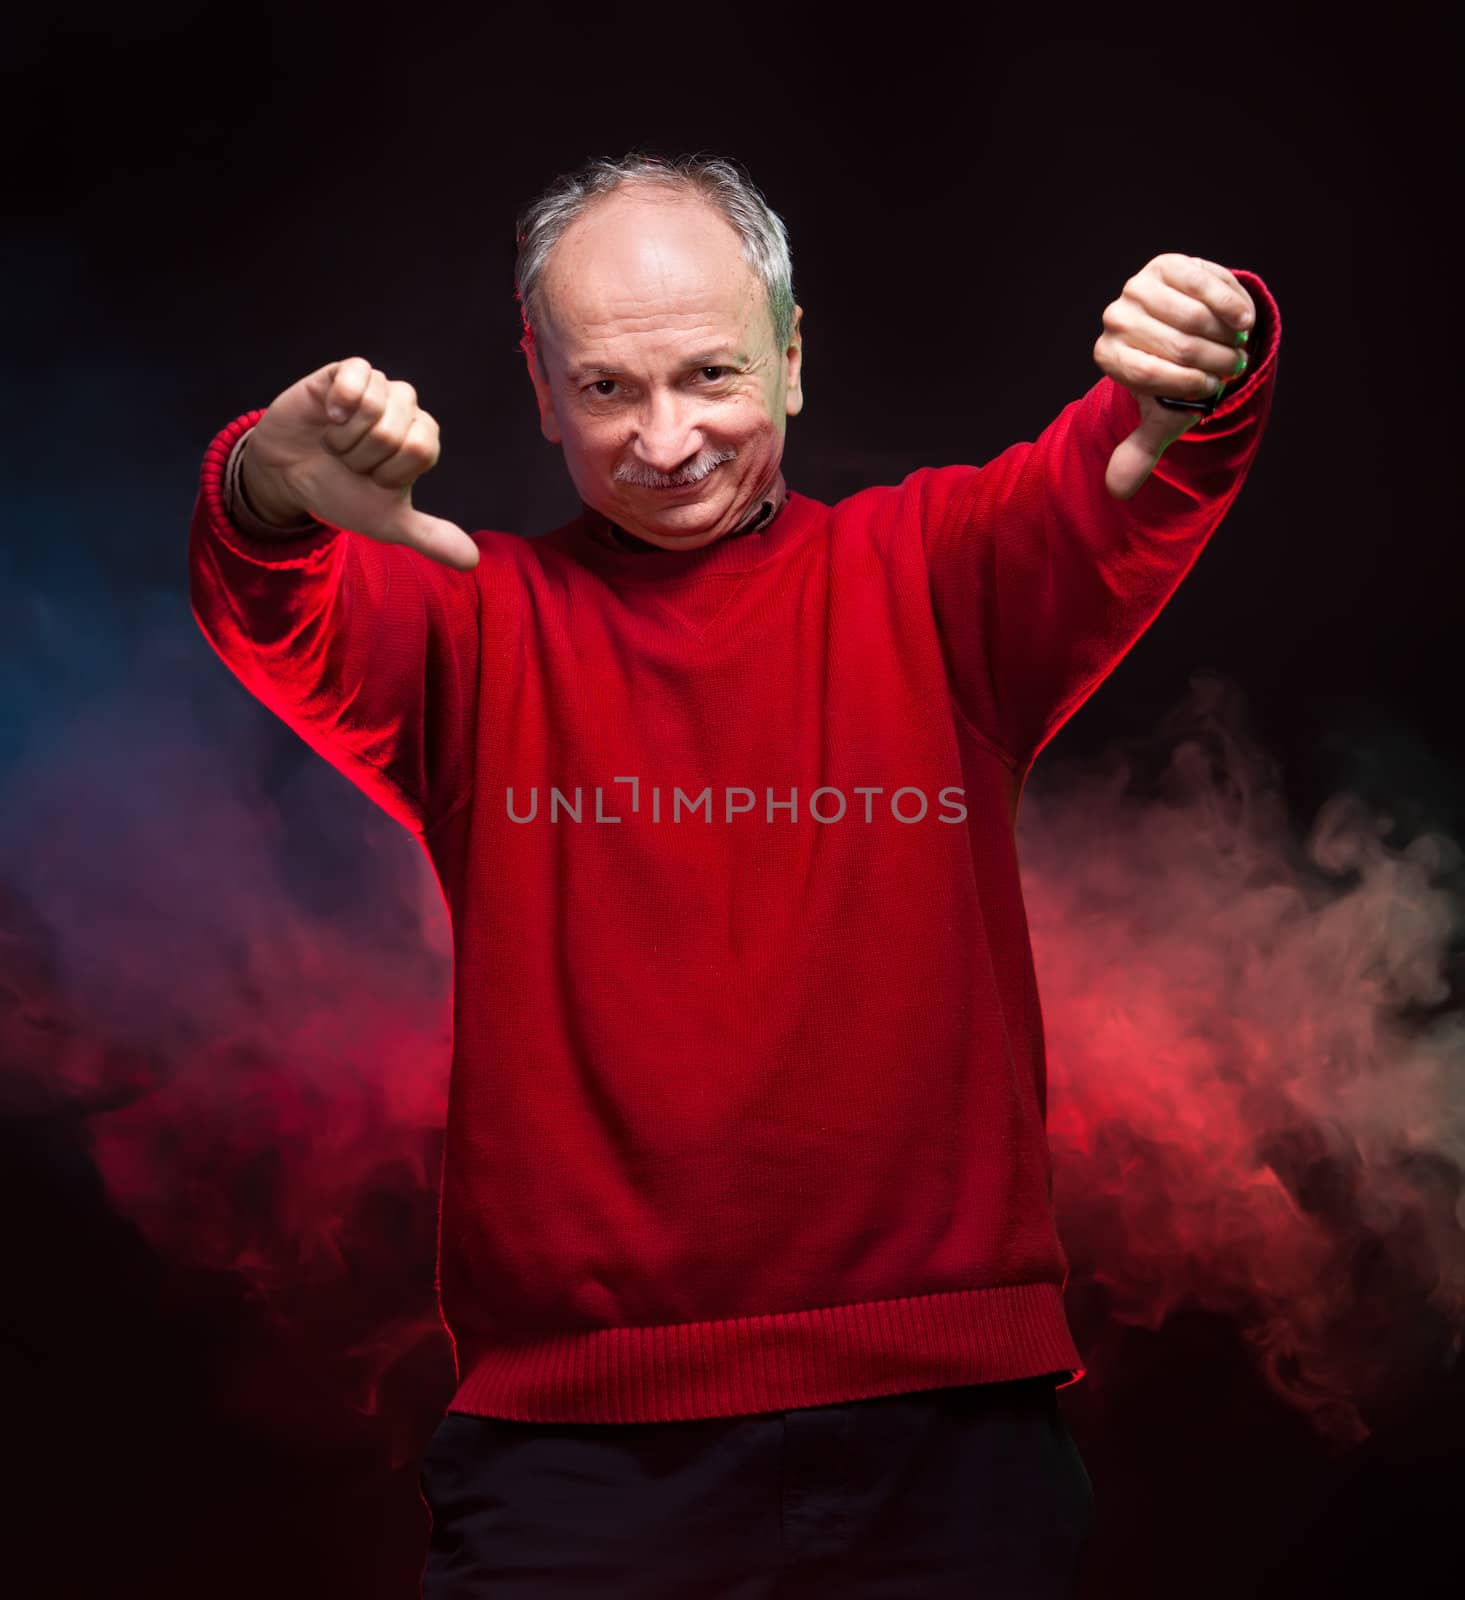 An elderly man in a red sweater shows thumbs down on a dark background